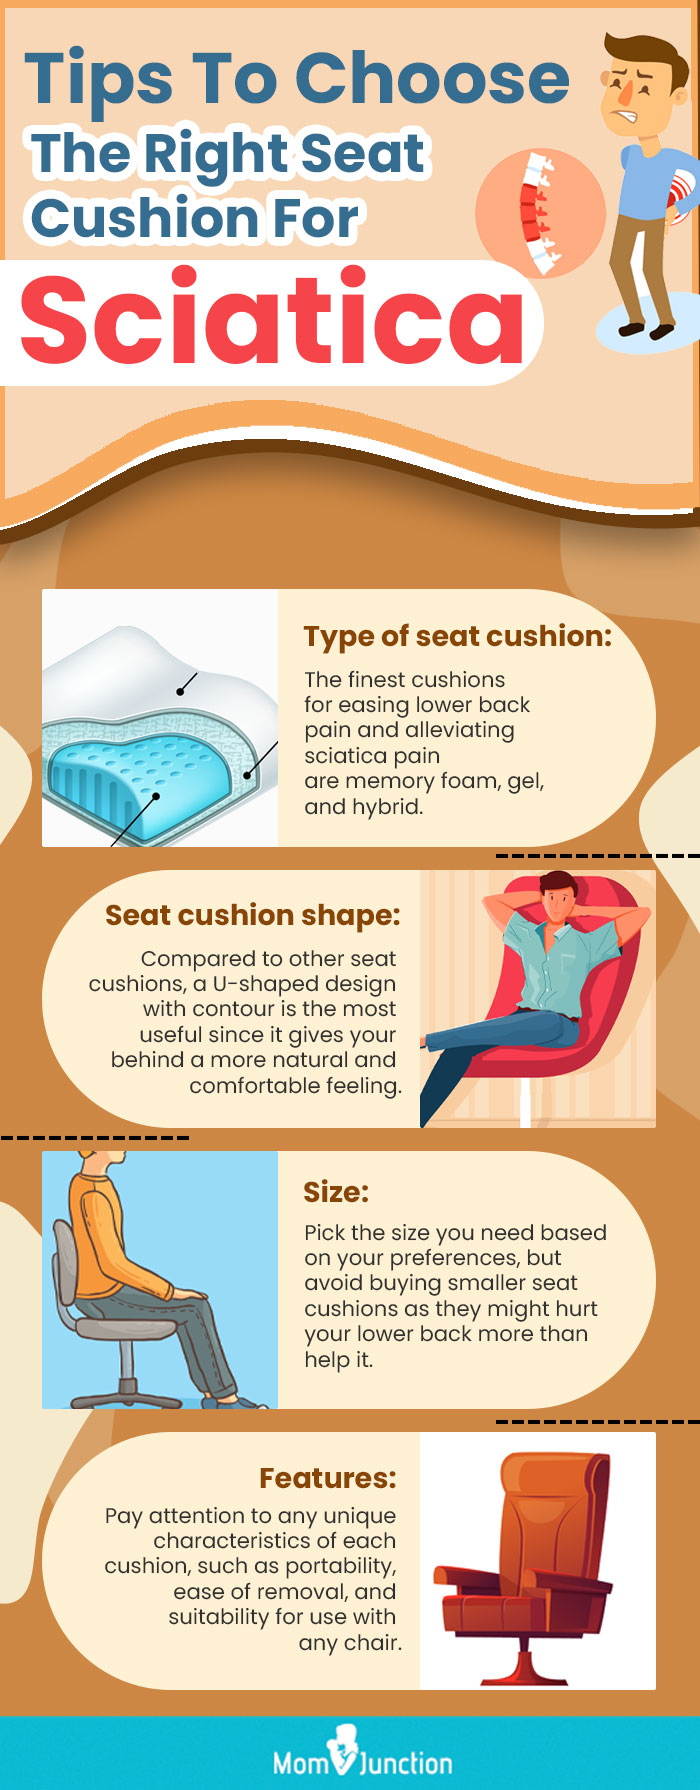 https://www.momjunction.com/wp-content/uploads/2023/01/Tips-To-Choose-The-Right-Seat-Cushion-For-Sciatica.jpg